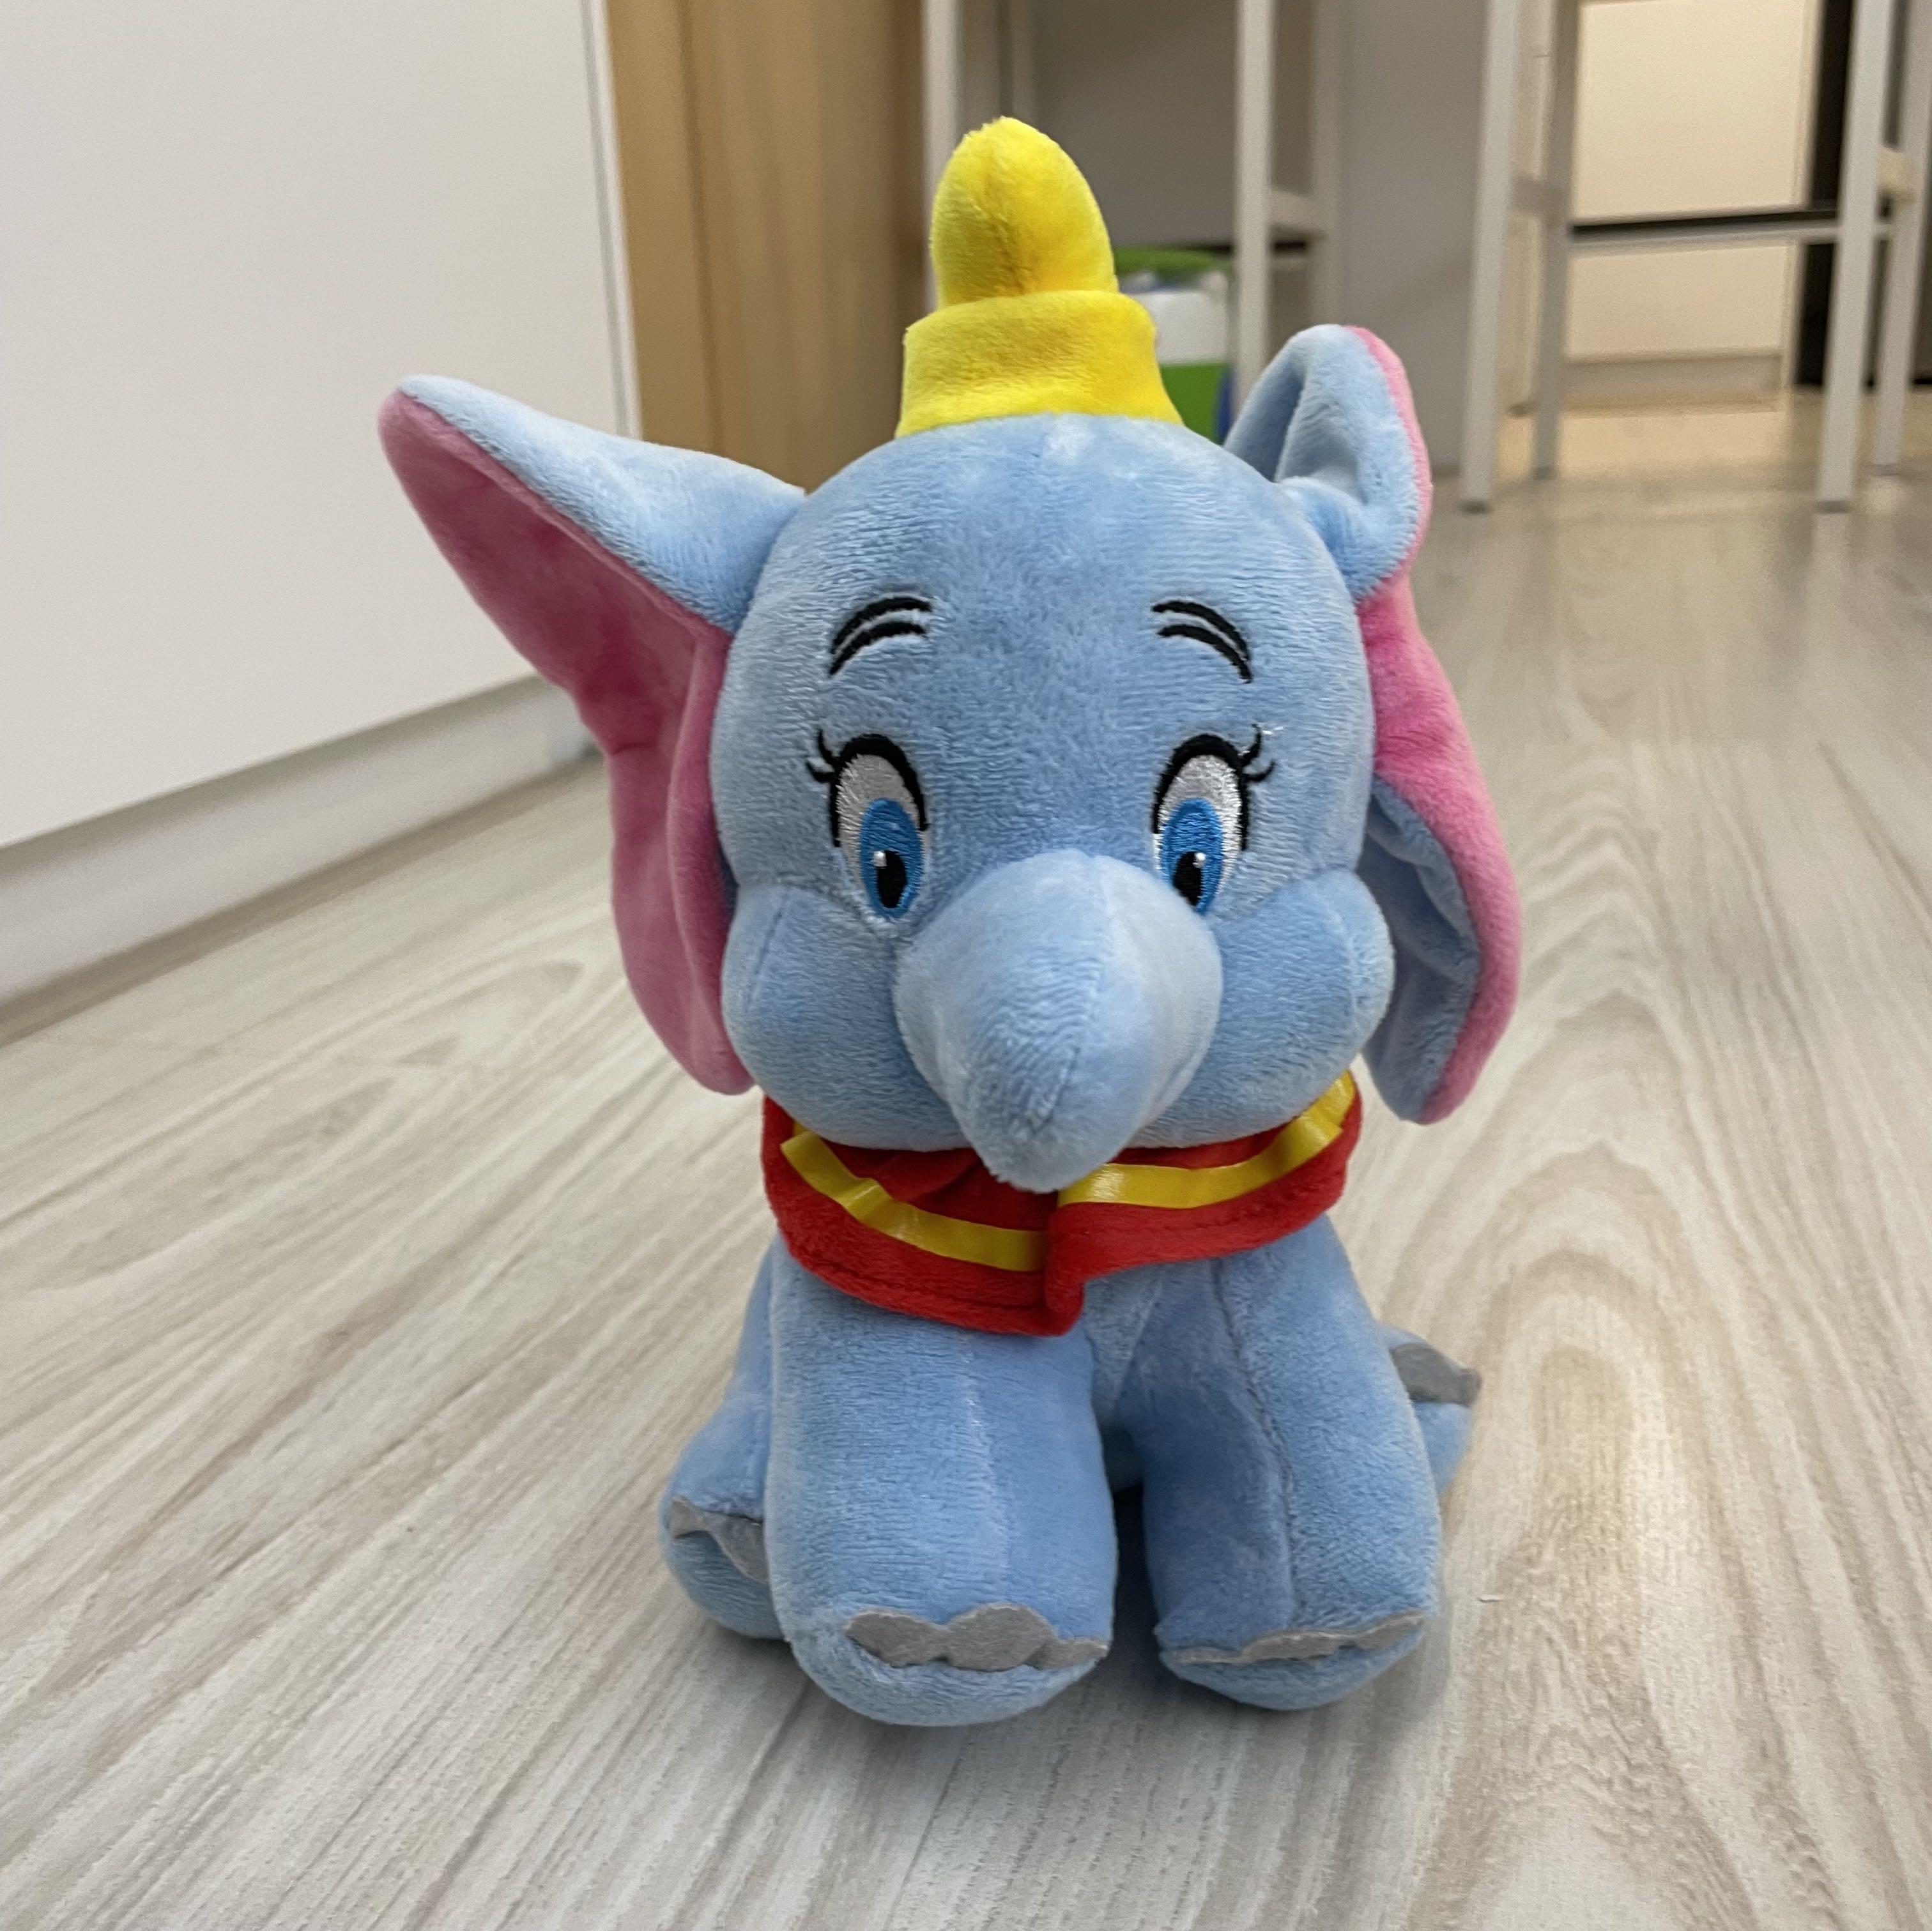 Dumbo soft toy, Toys & Games, Other Toys on Carousell